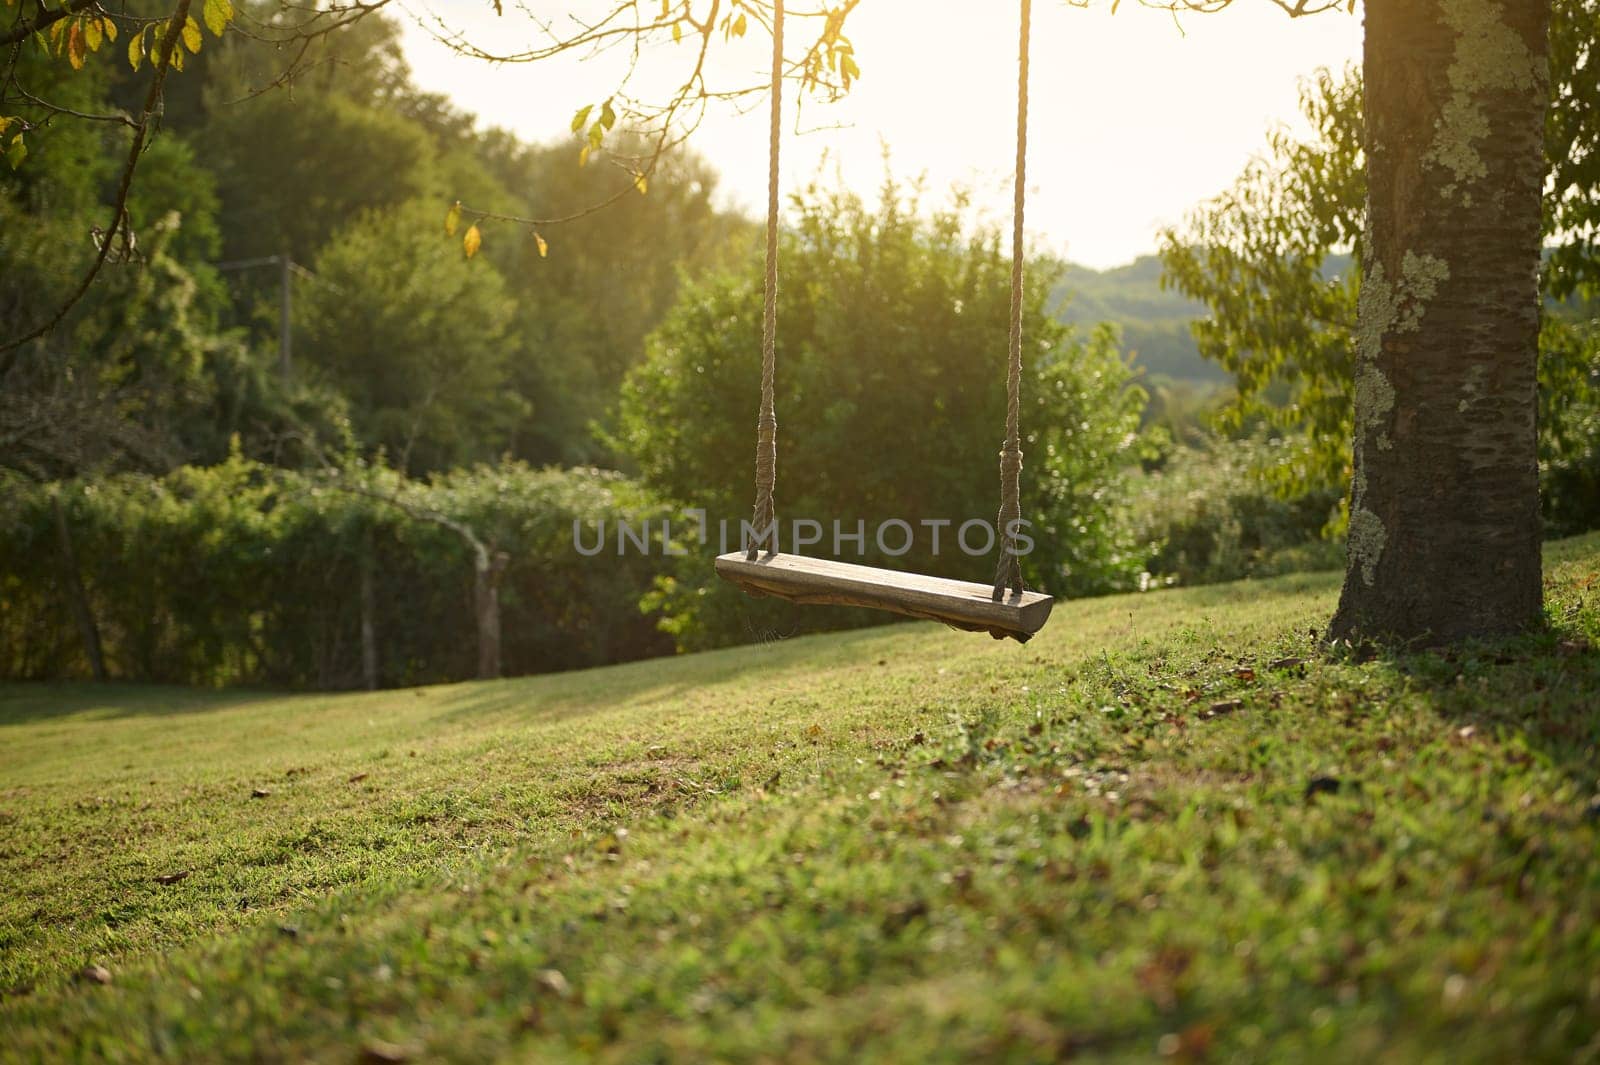 Still life with a simple wooden swing handing on the tree branch on the garden at sunset. Swing - play equipment against green grass background